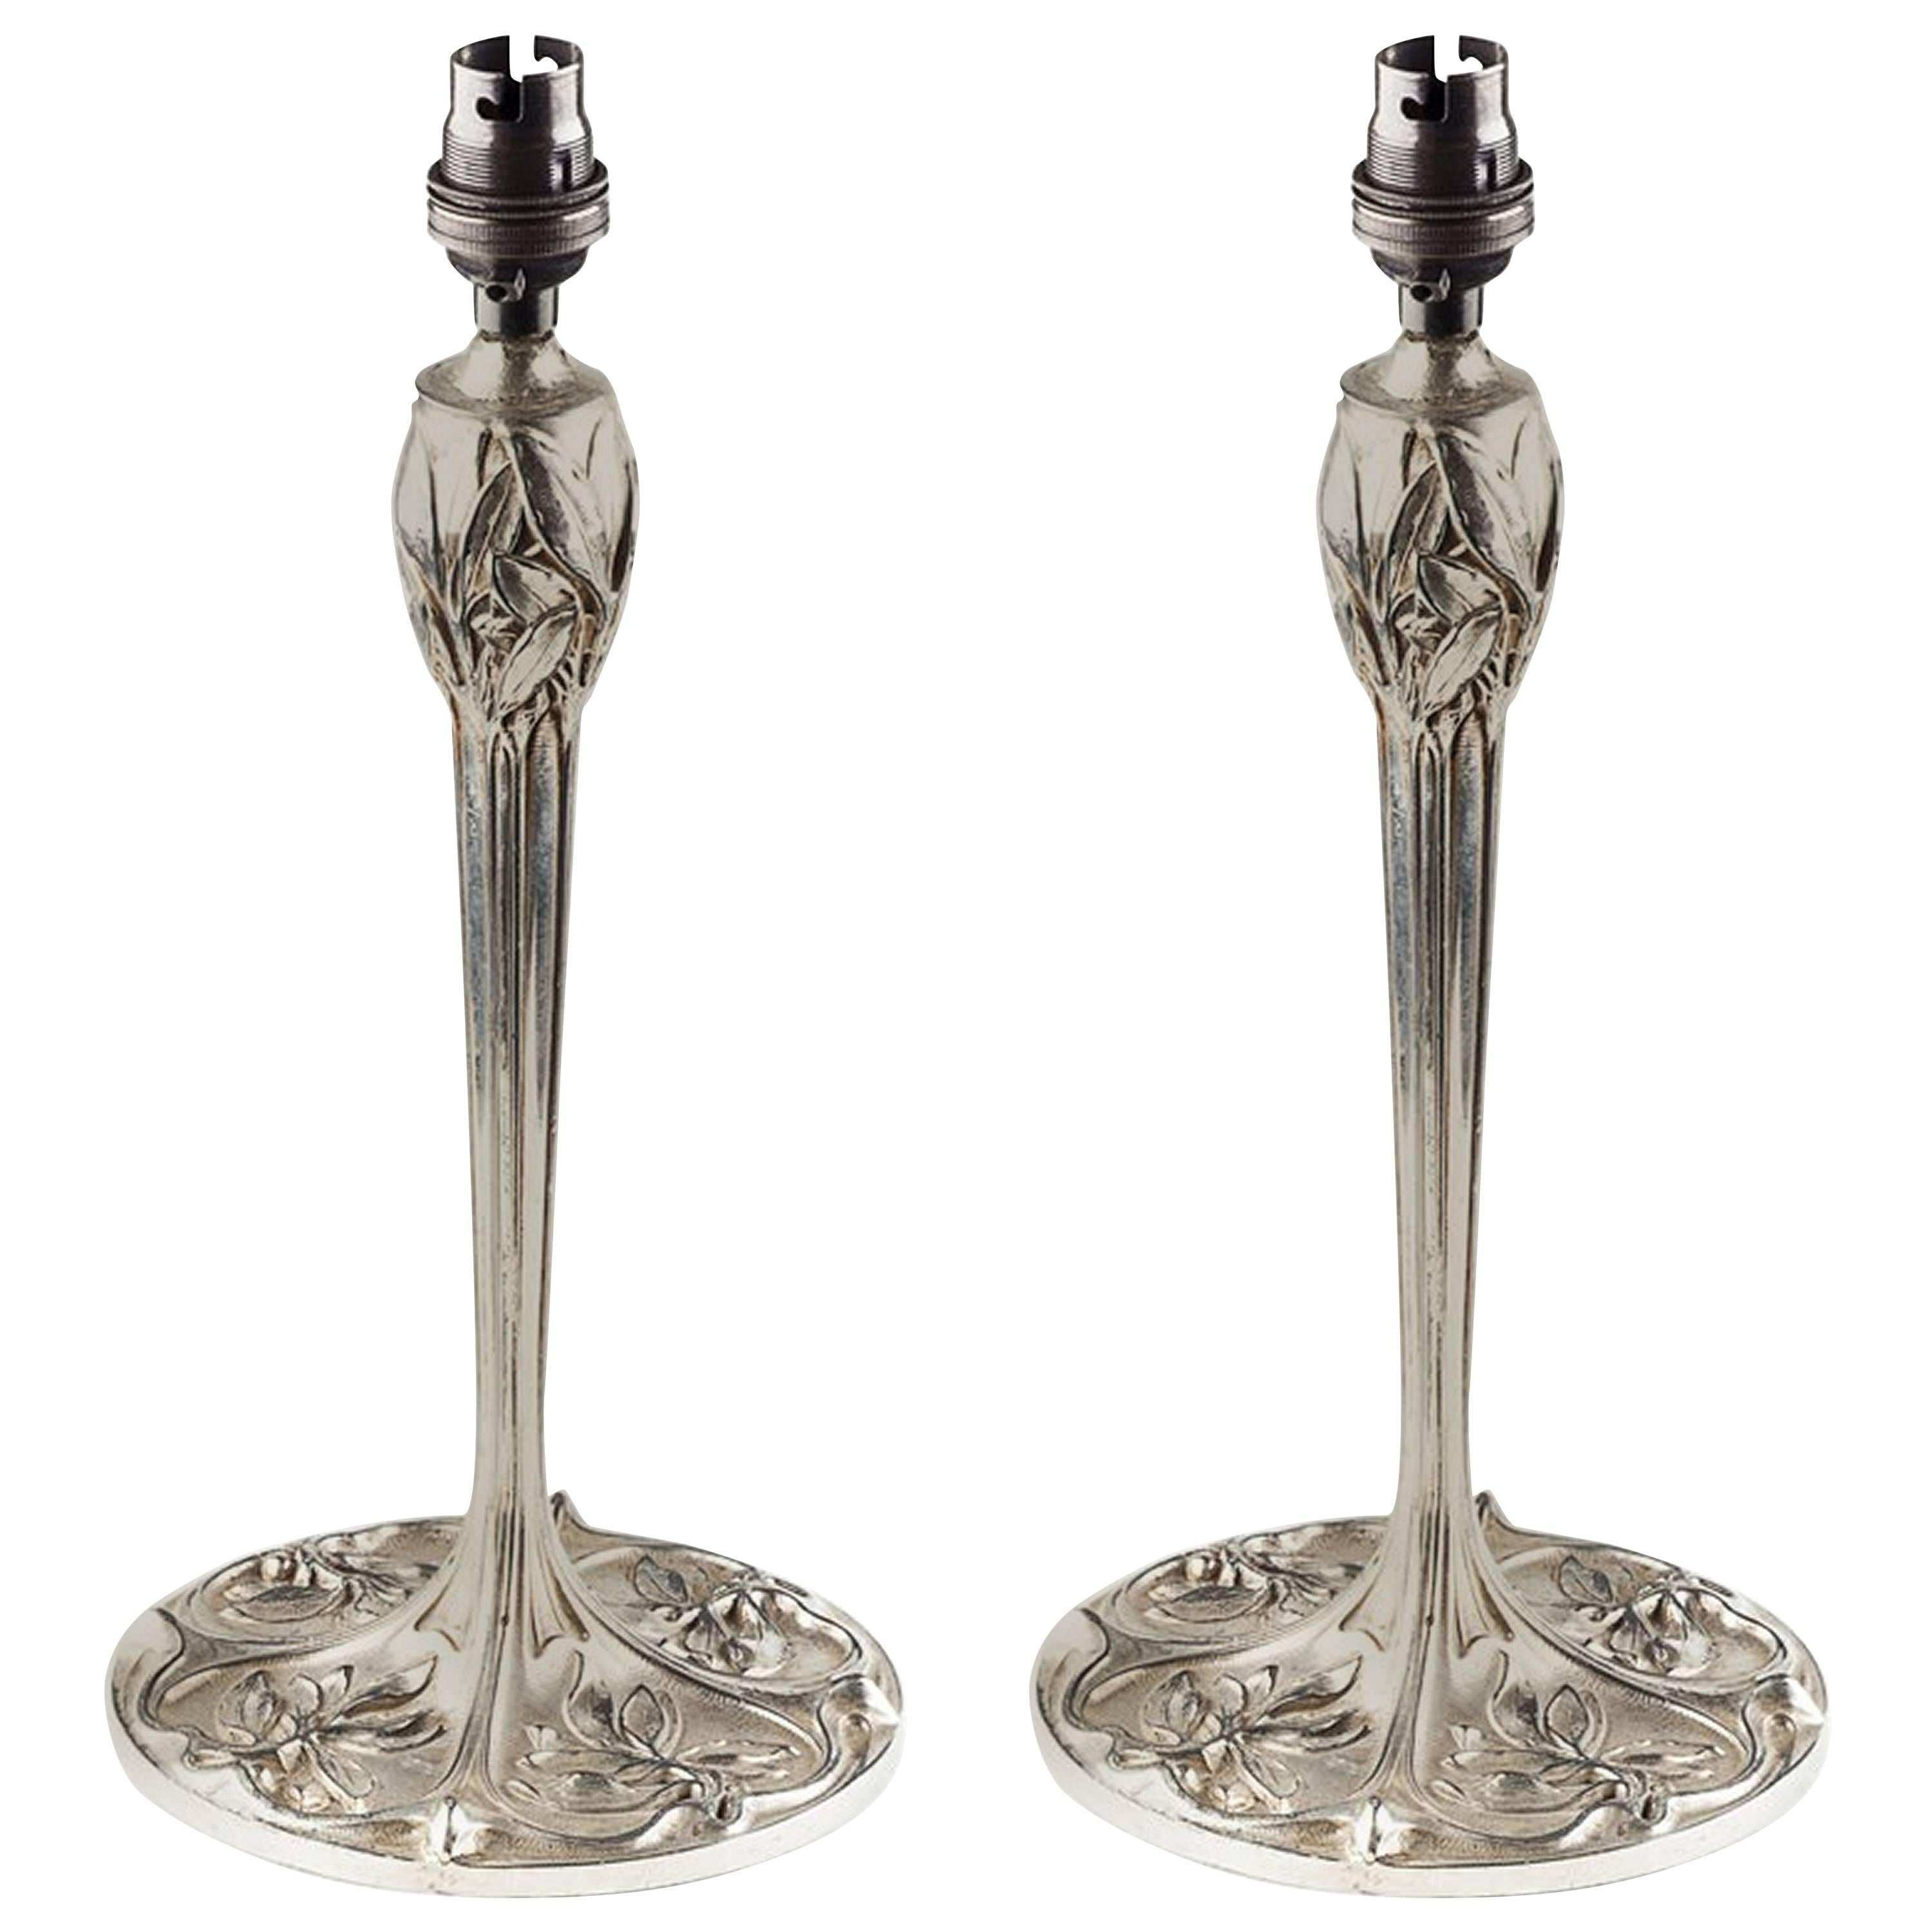 A Pair of Arts and Crafts Silver Plated Table Lamps With Stylised Floral Details